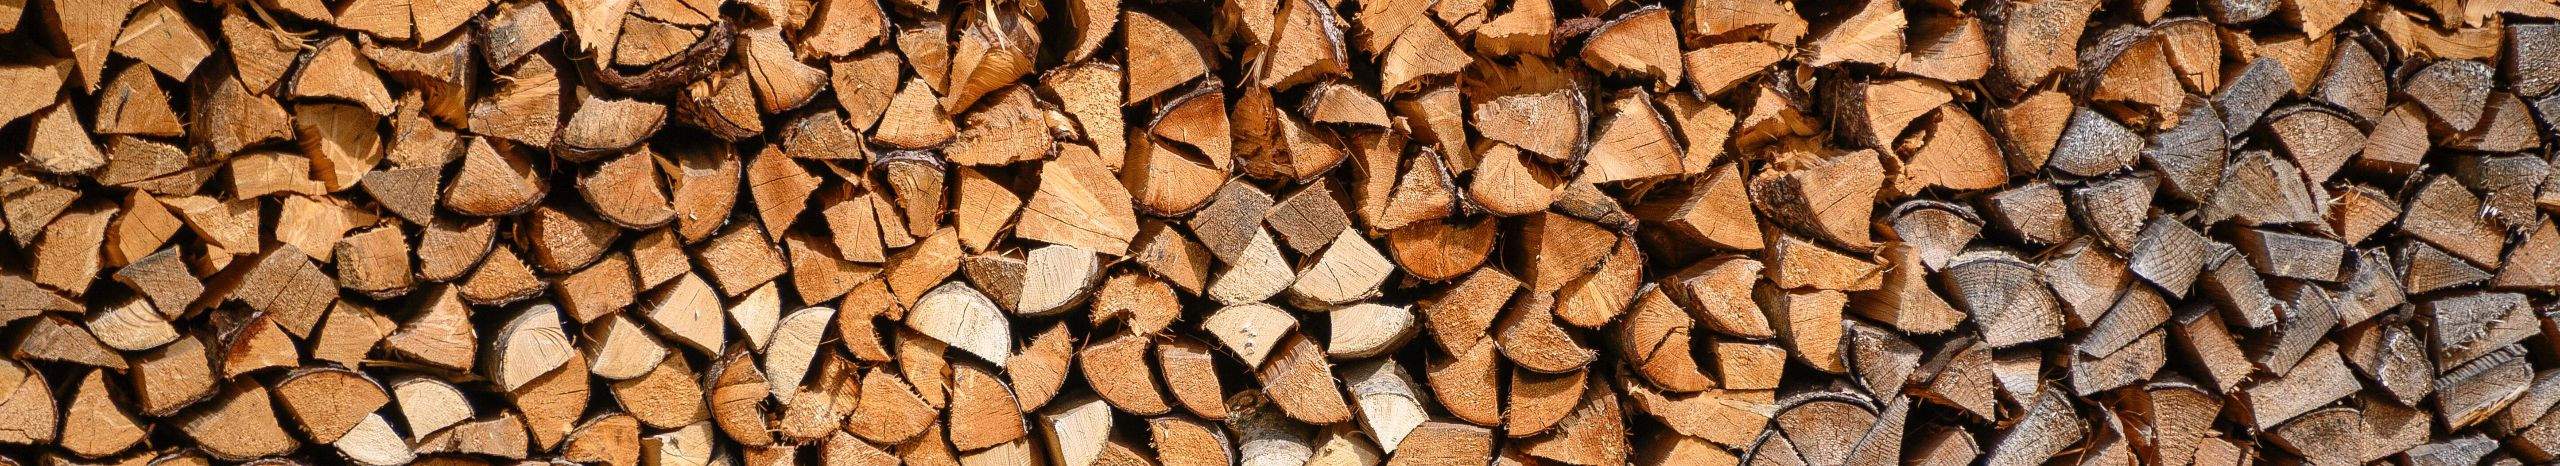 mixed trees, raw firewood, heating trees in nets, grey alder, sanglepp, wound, dry trees, breaking of trees, firewood for heating, hob trees